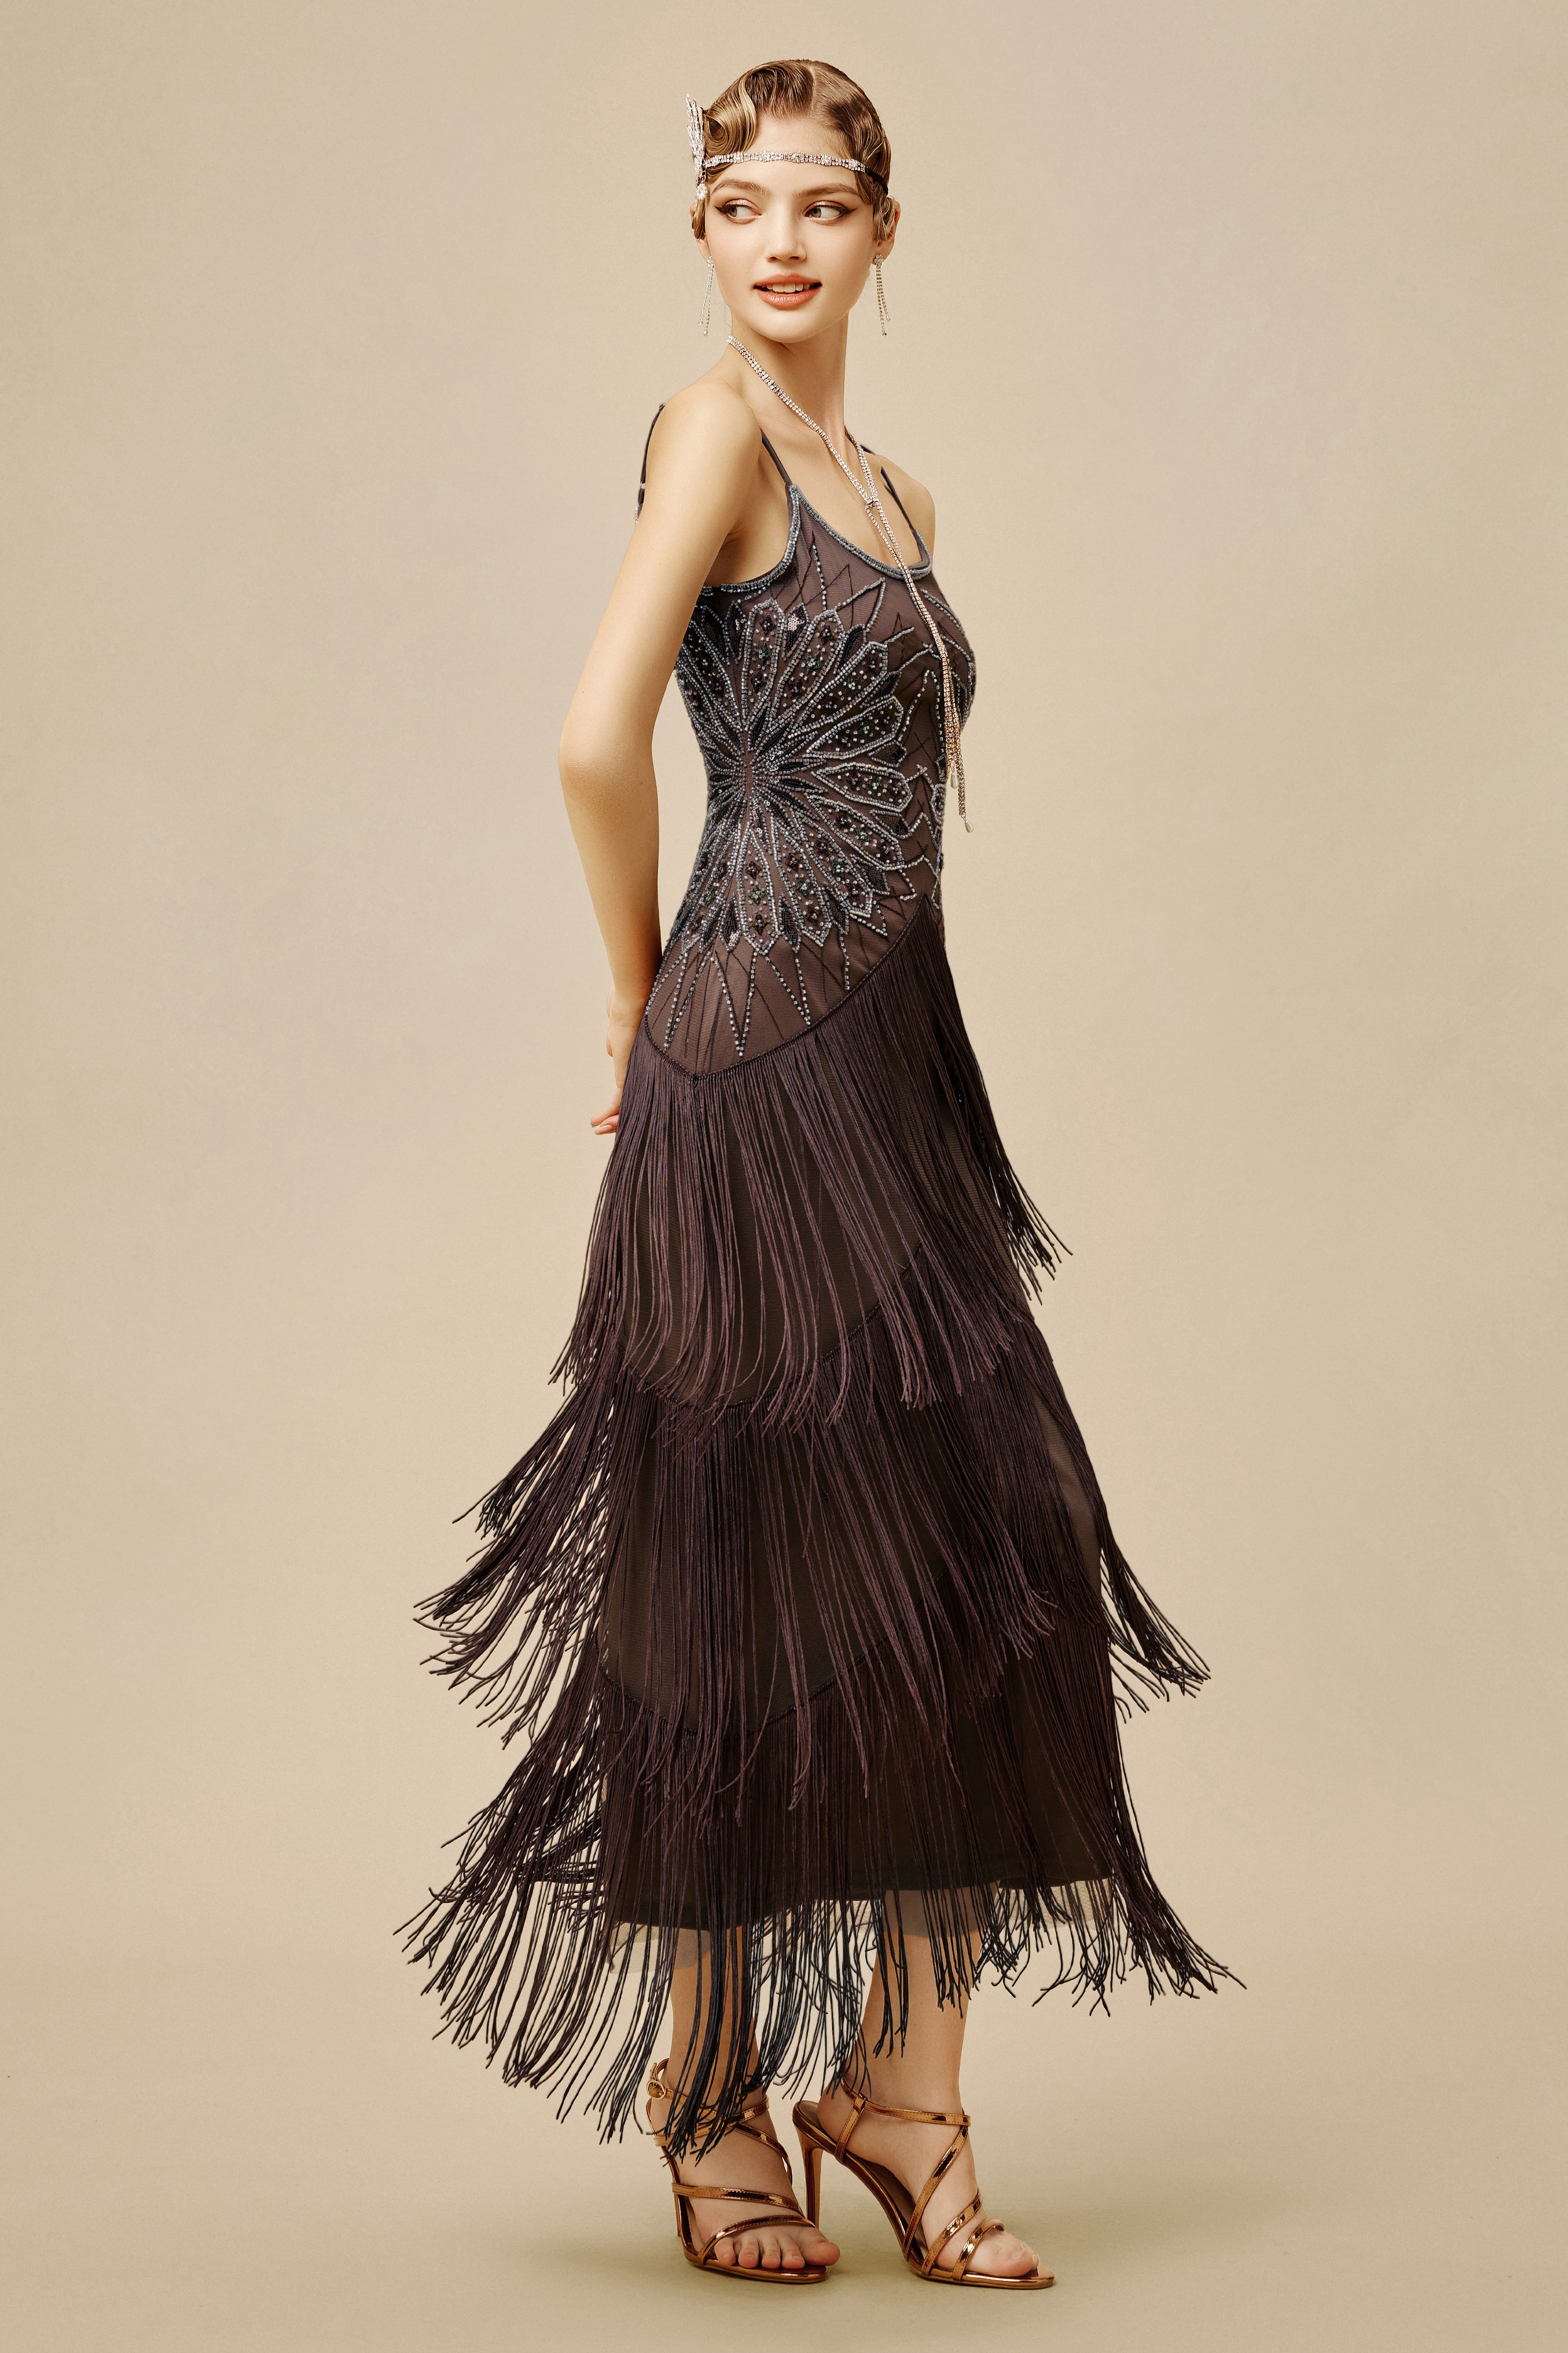 New Years Eve Outfit: Beaded Fringe Gown — Krity S